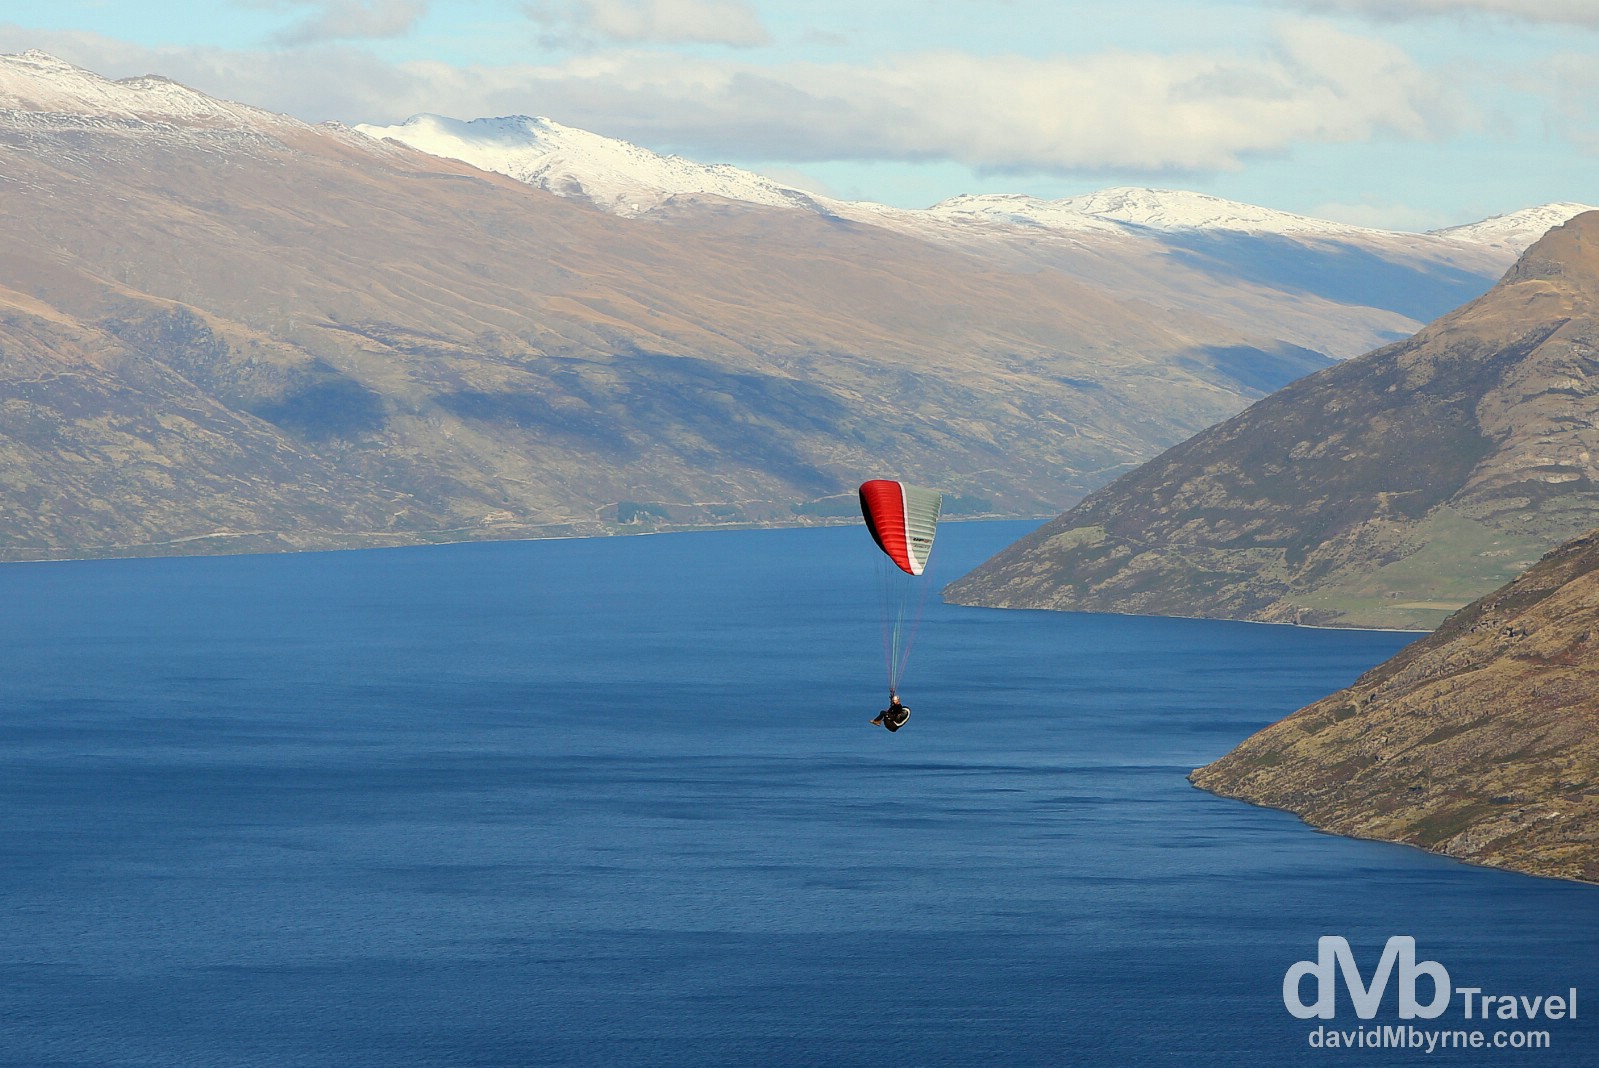 Paragliding over Lake Wakatipu, Queenstown, South Island, New Zealand. May 23rd 2012.